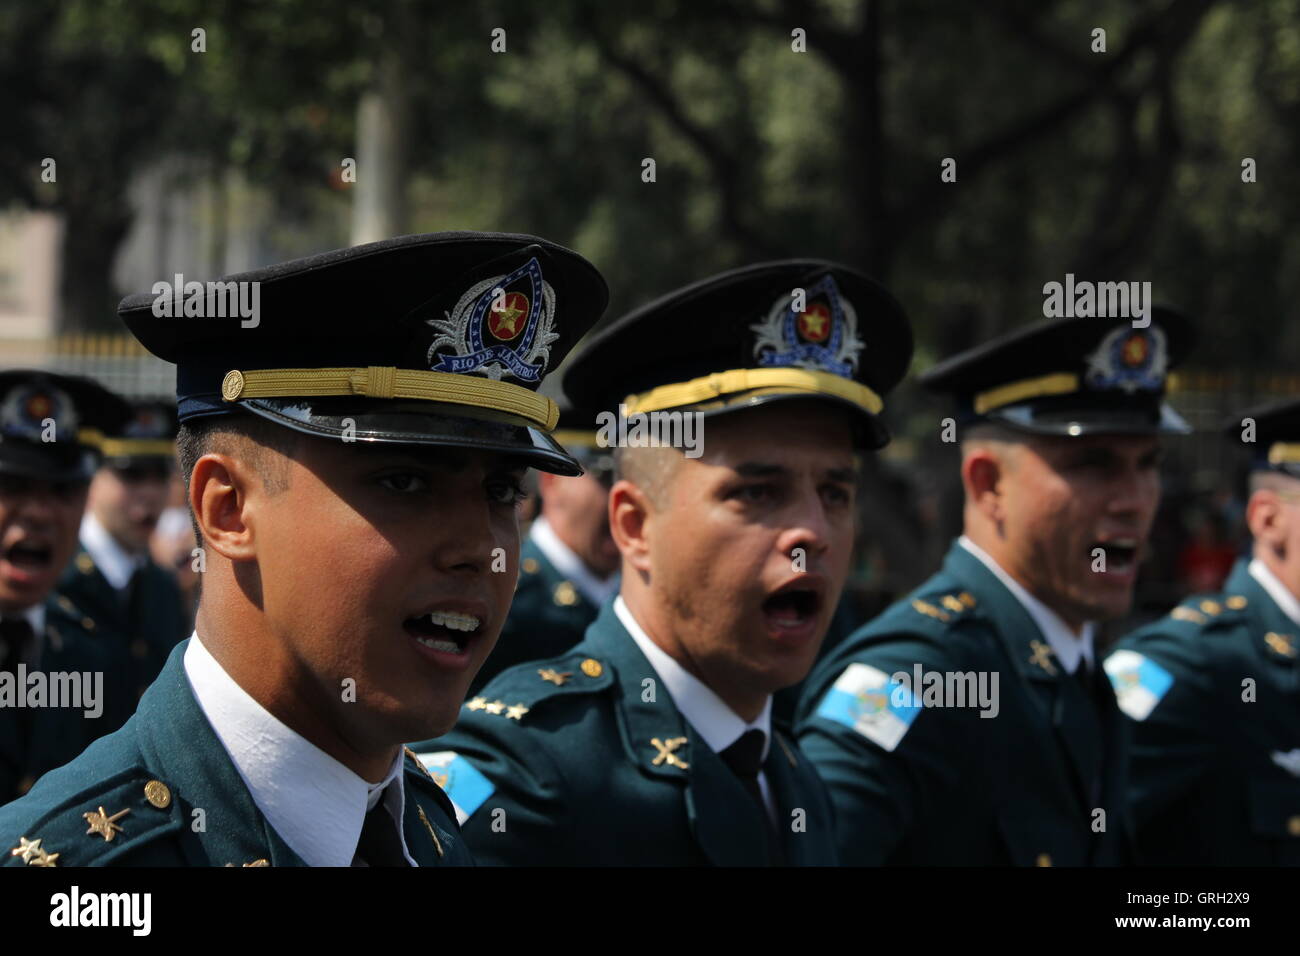 Rio de Janeiro, Brazil, September 7, 2016: On the 7th of September is celebrated Independence Day in Brazil. Across the country there are military parades to celebrate the day. In Rio de Janeiro, the Navy military, Air Force, Army and various police forces parade at Avenida Presidente Vargas, near the Central do Brazil. The military exhibits music, weapons and military vehicles. Thousands of people attend the parade that is traditional in the city. Credit:  Luiz Souza/Alamy Live News Stock Photo